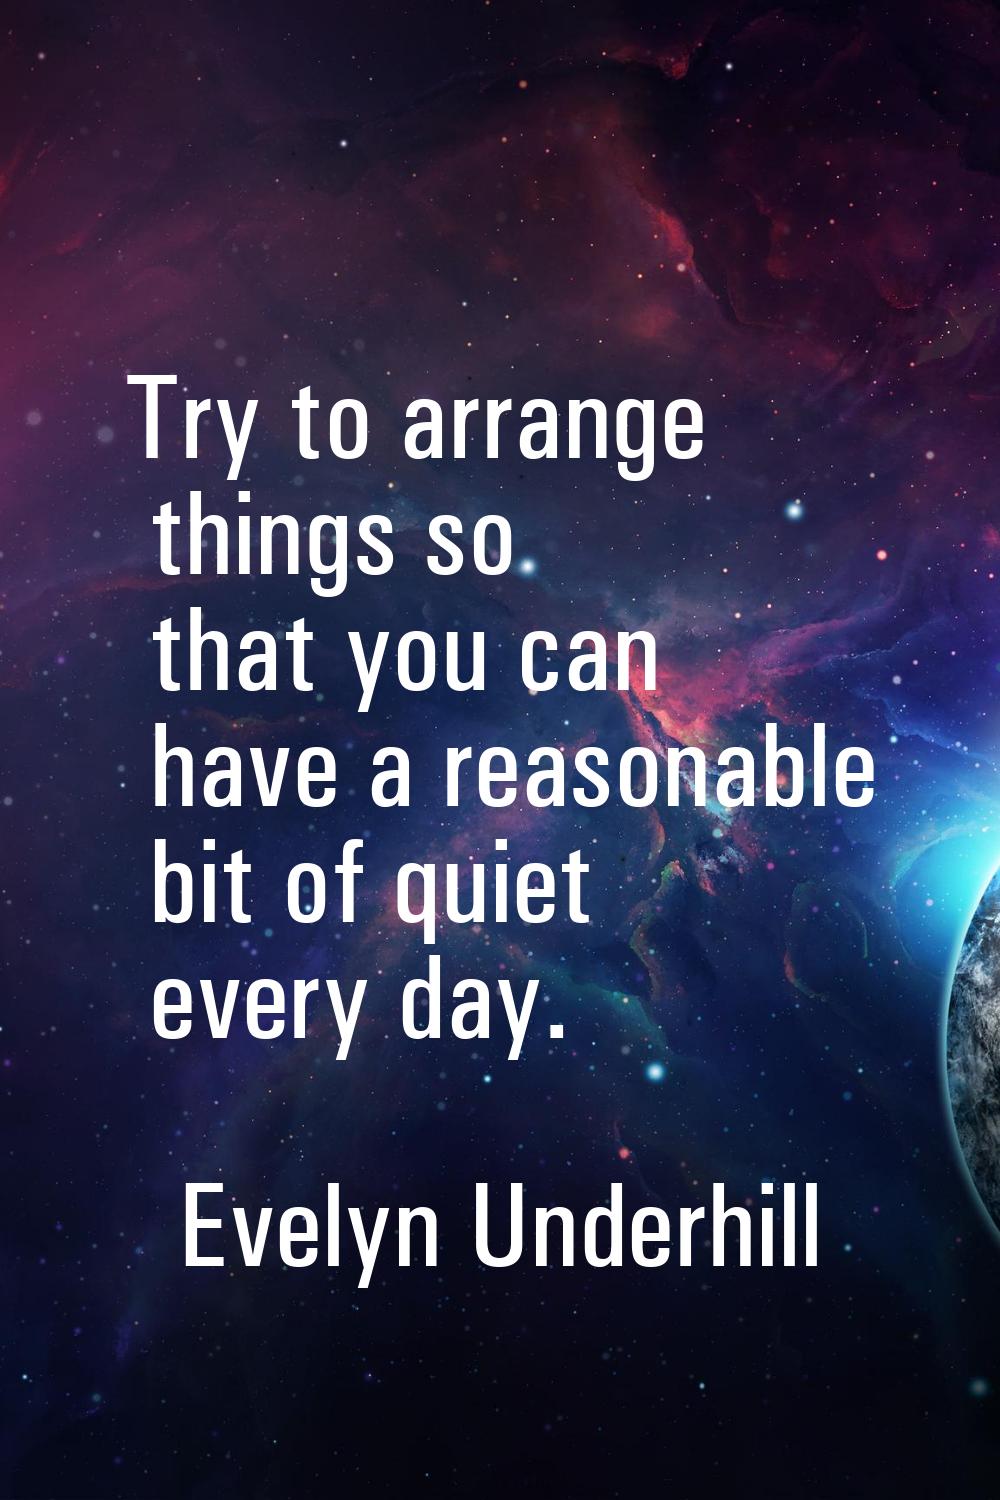 Try to arrange things so that you can have a reasonable bit of quiet every day.